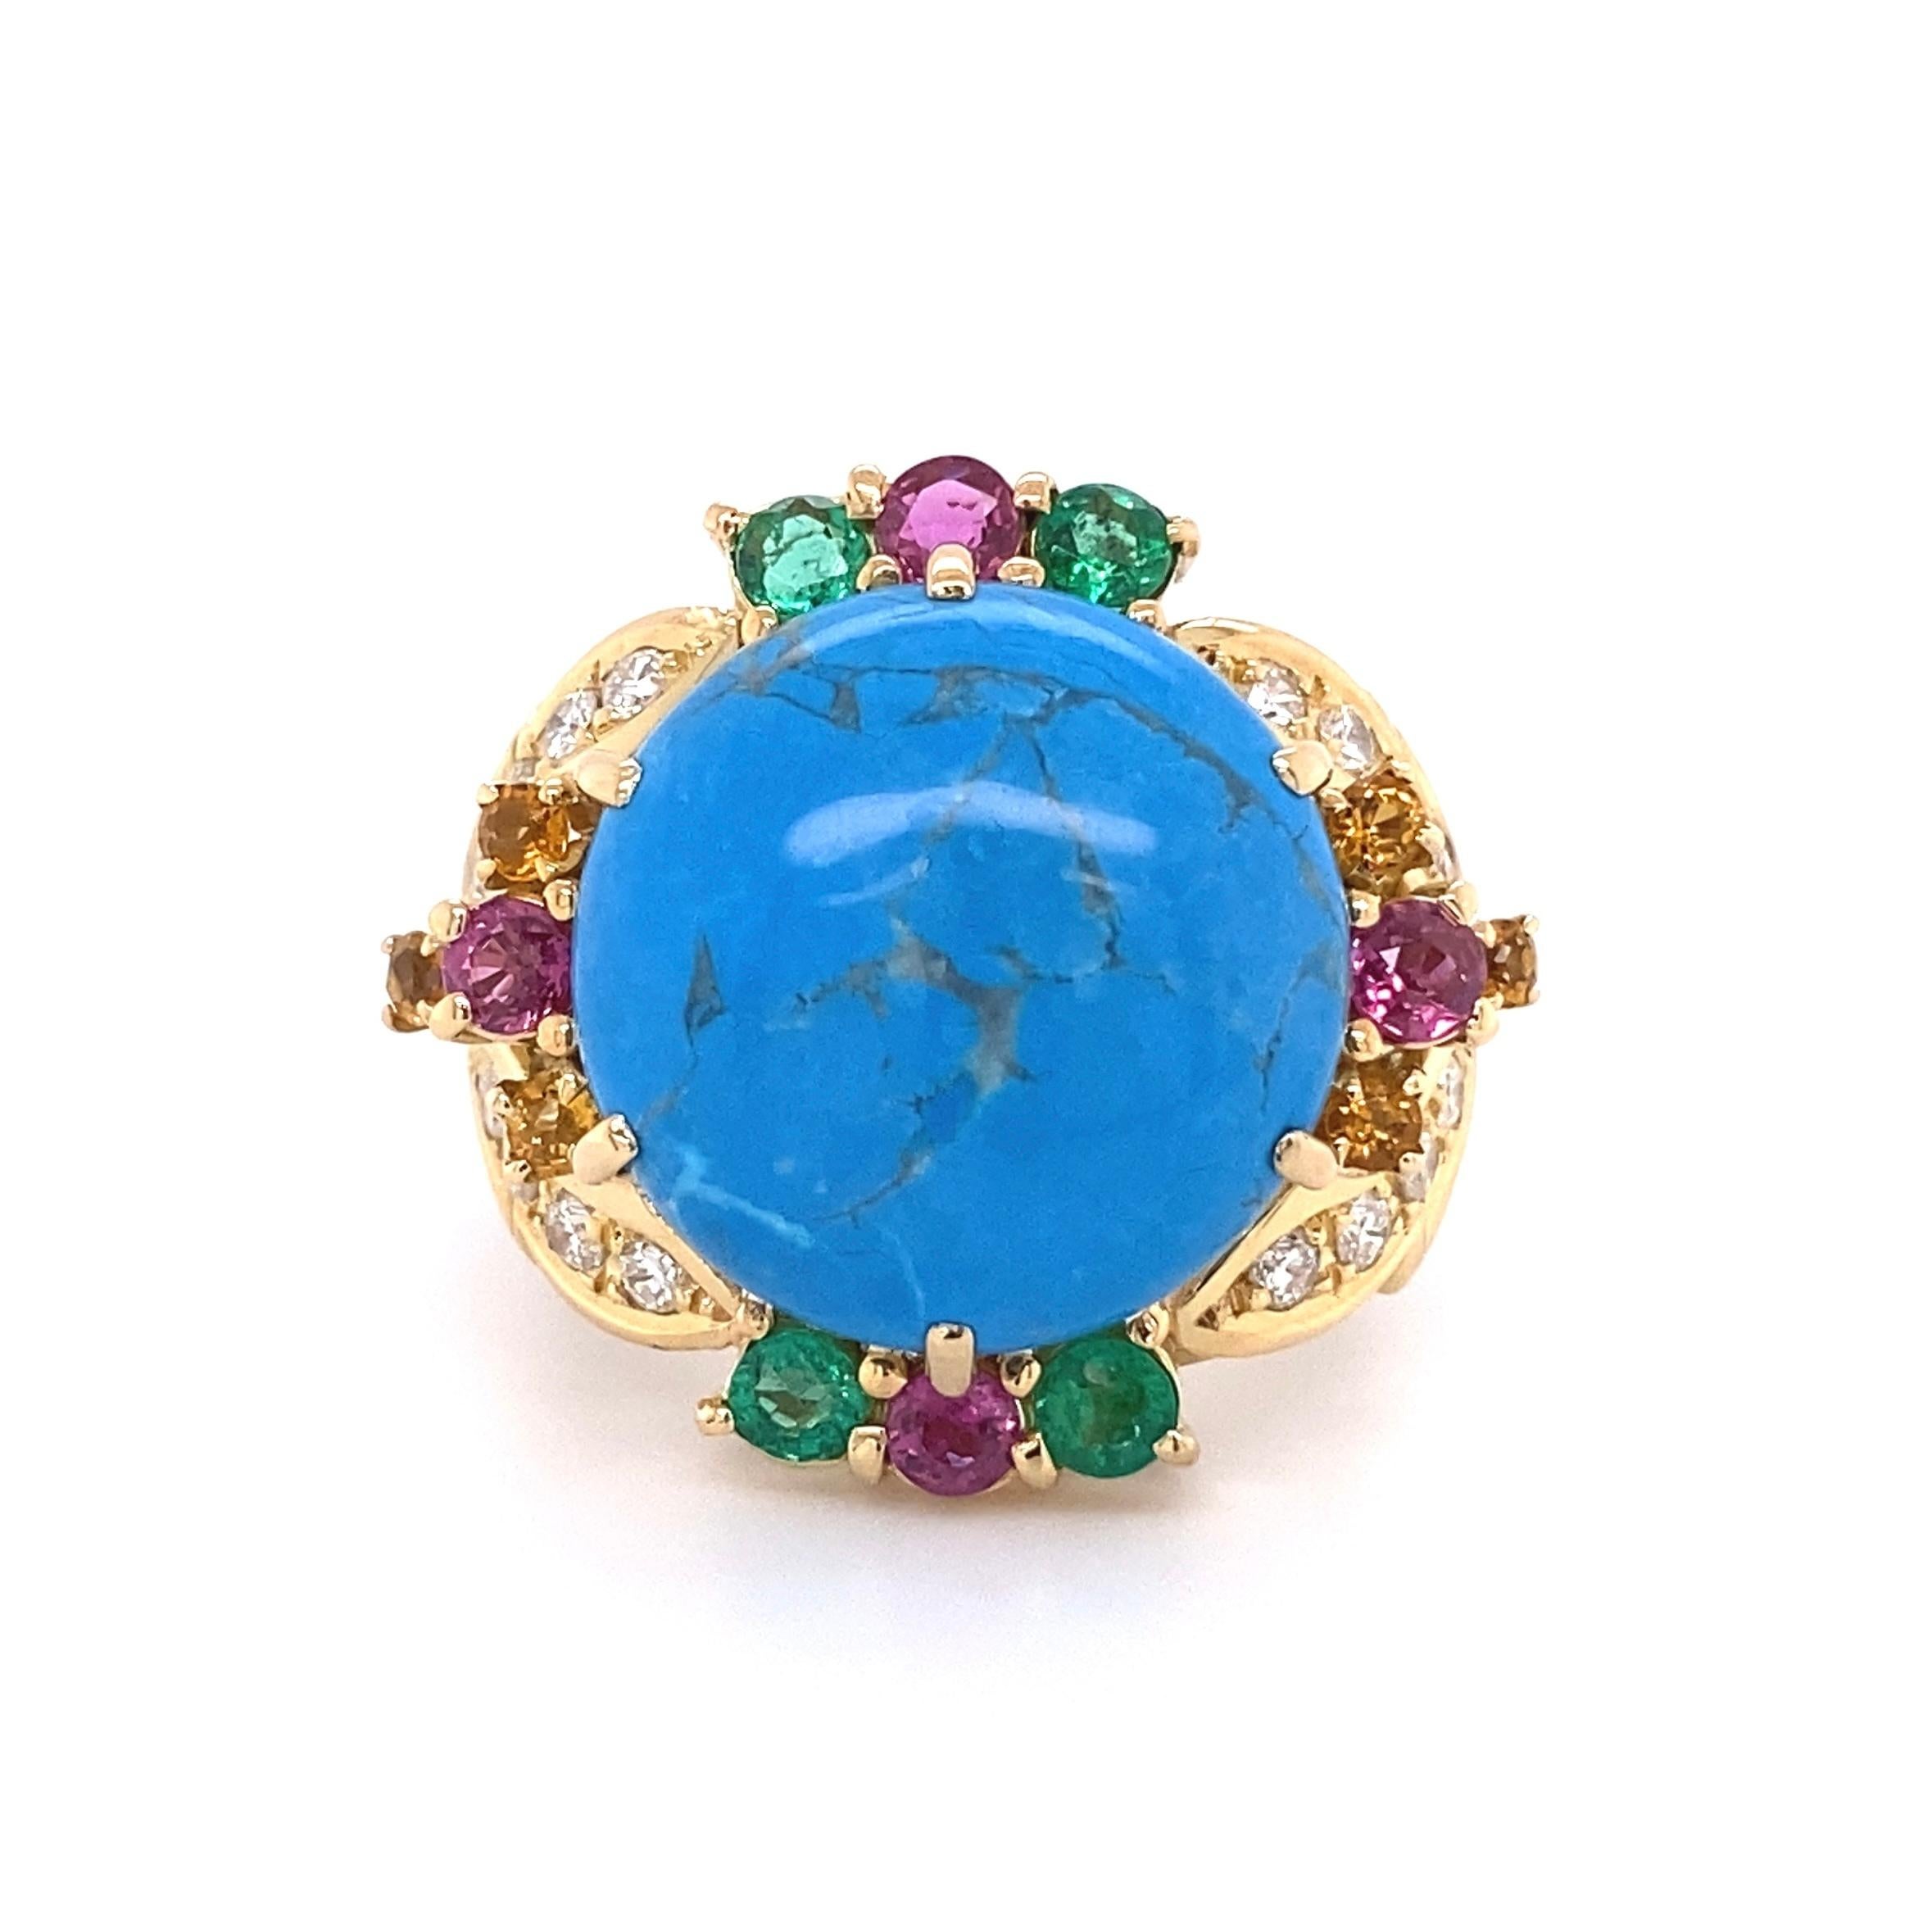 5.5 Carat Turquoise Diamond Emerald Ruby Gold Cocktail Ring Estate Fine Jewelry In Excellent Condition For Sale In Montreal, QC